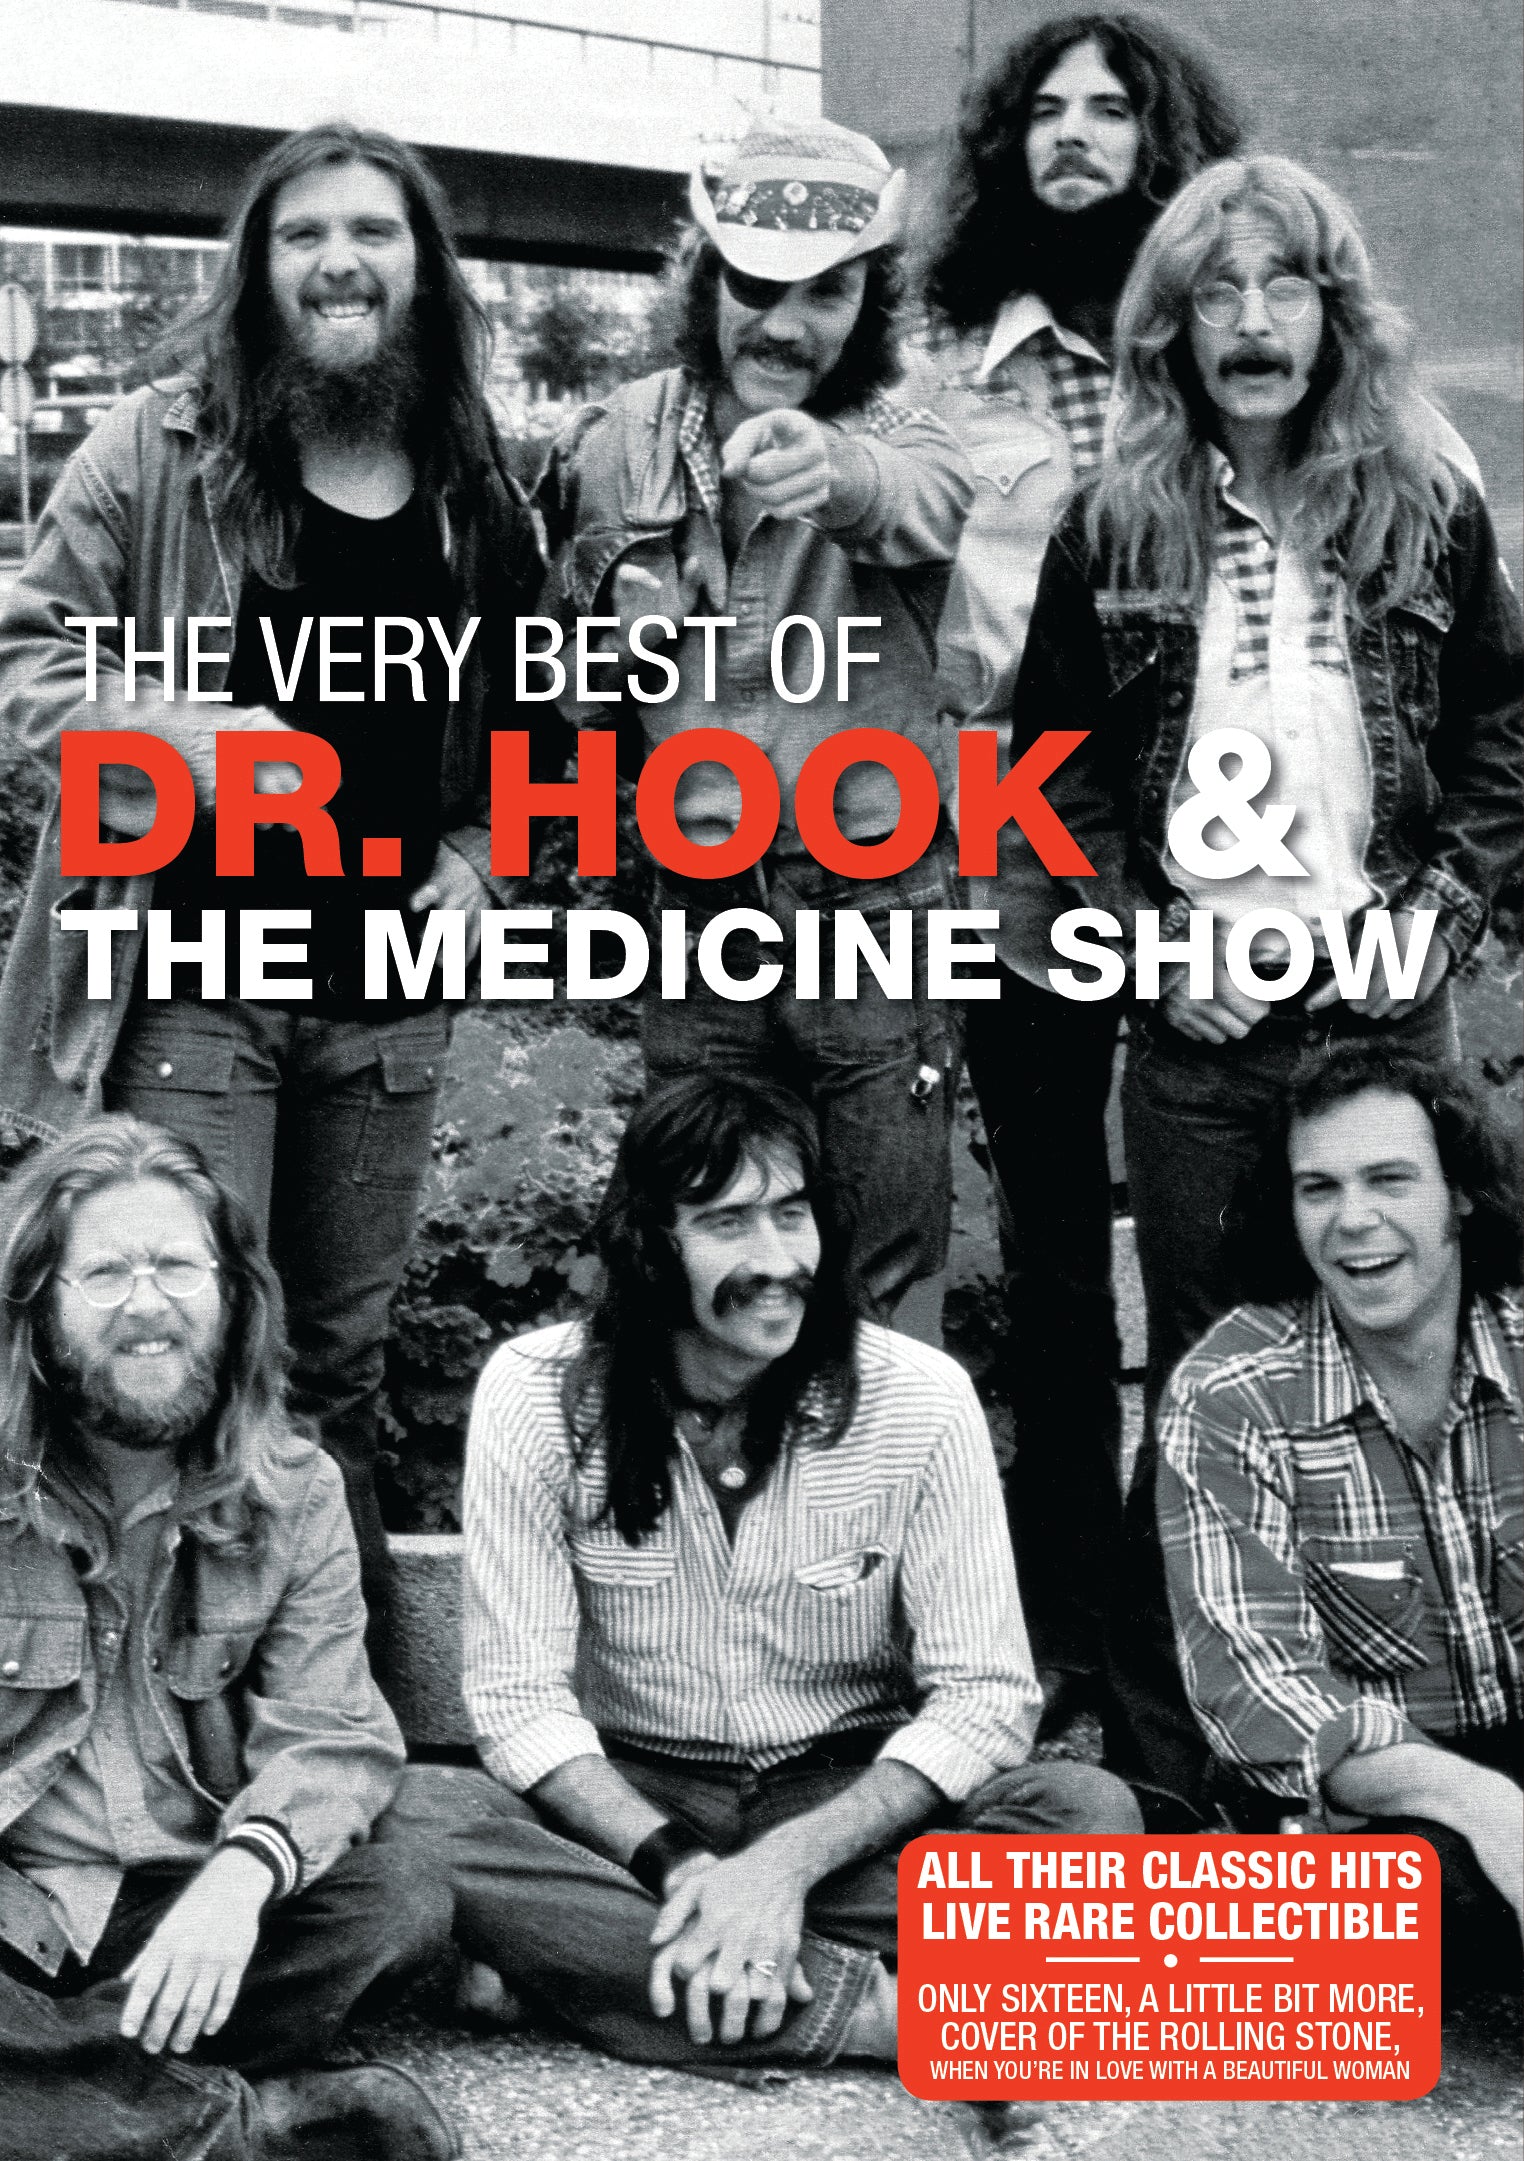 DR. HOOK & THE MEDICINE SHOW - THE VERY BEST OF DR. HOOK & THE MEDICINE SHOW